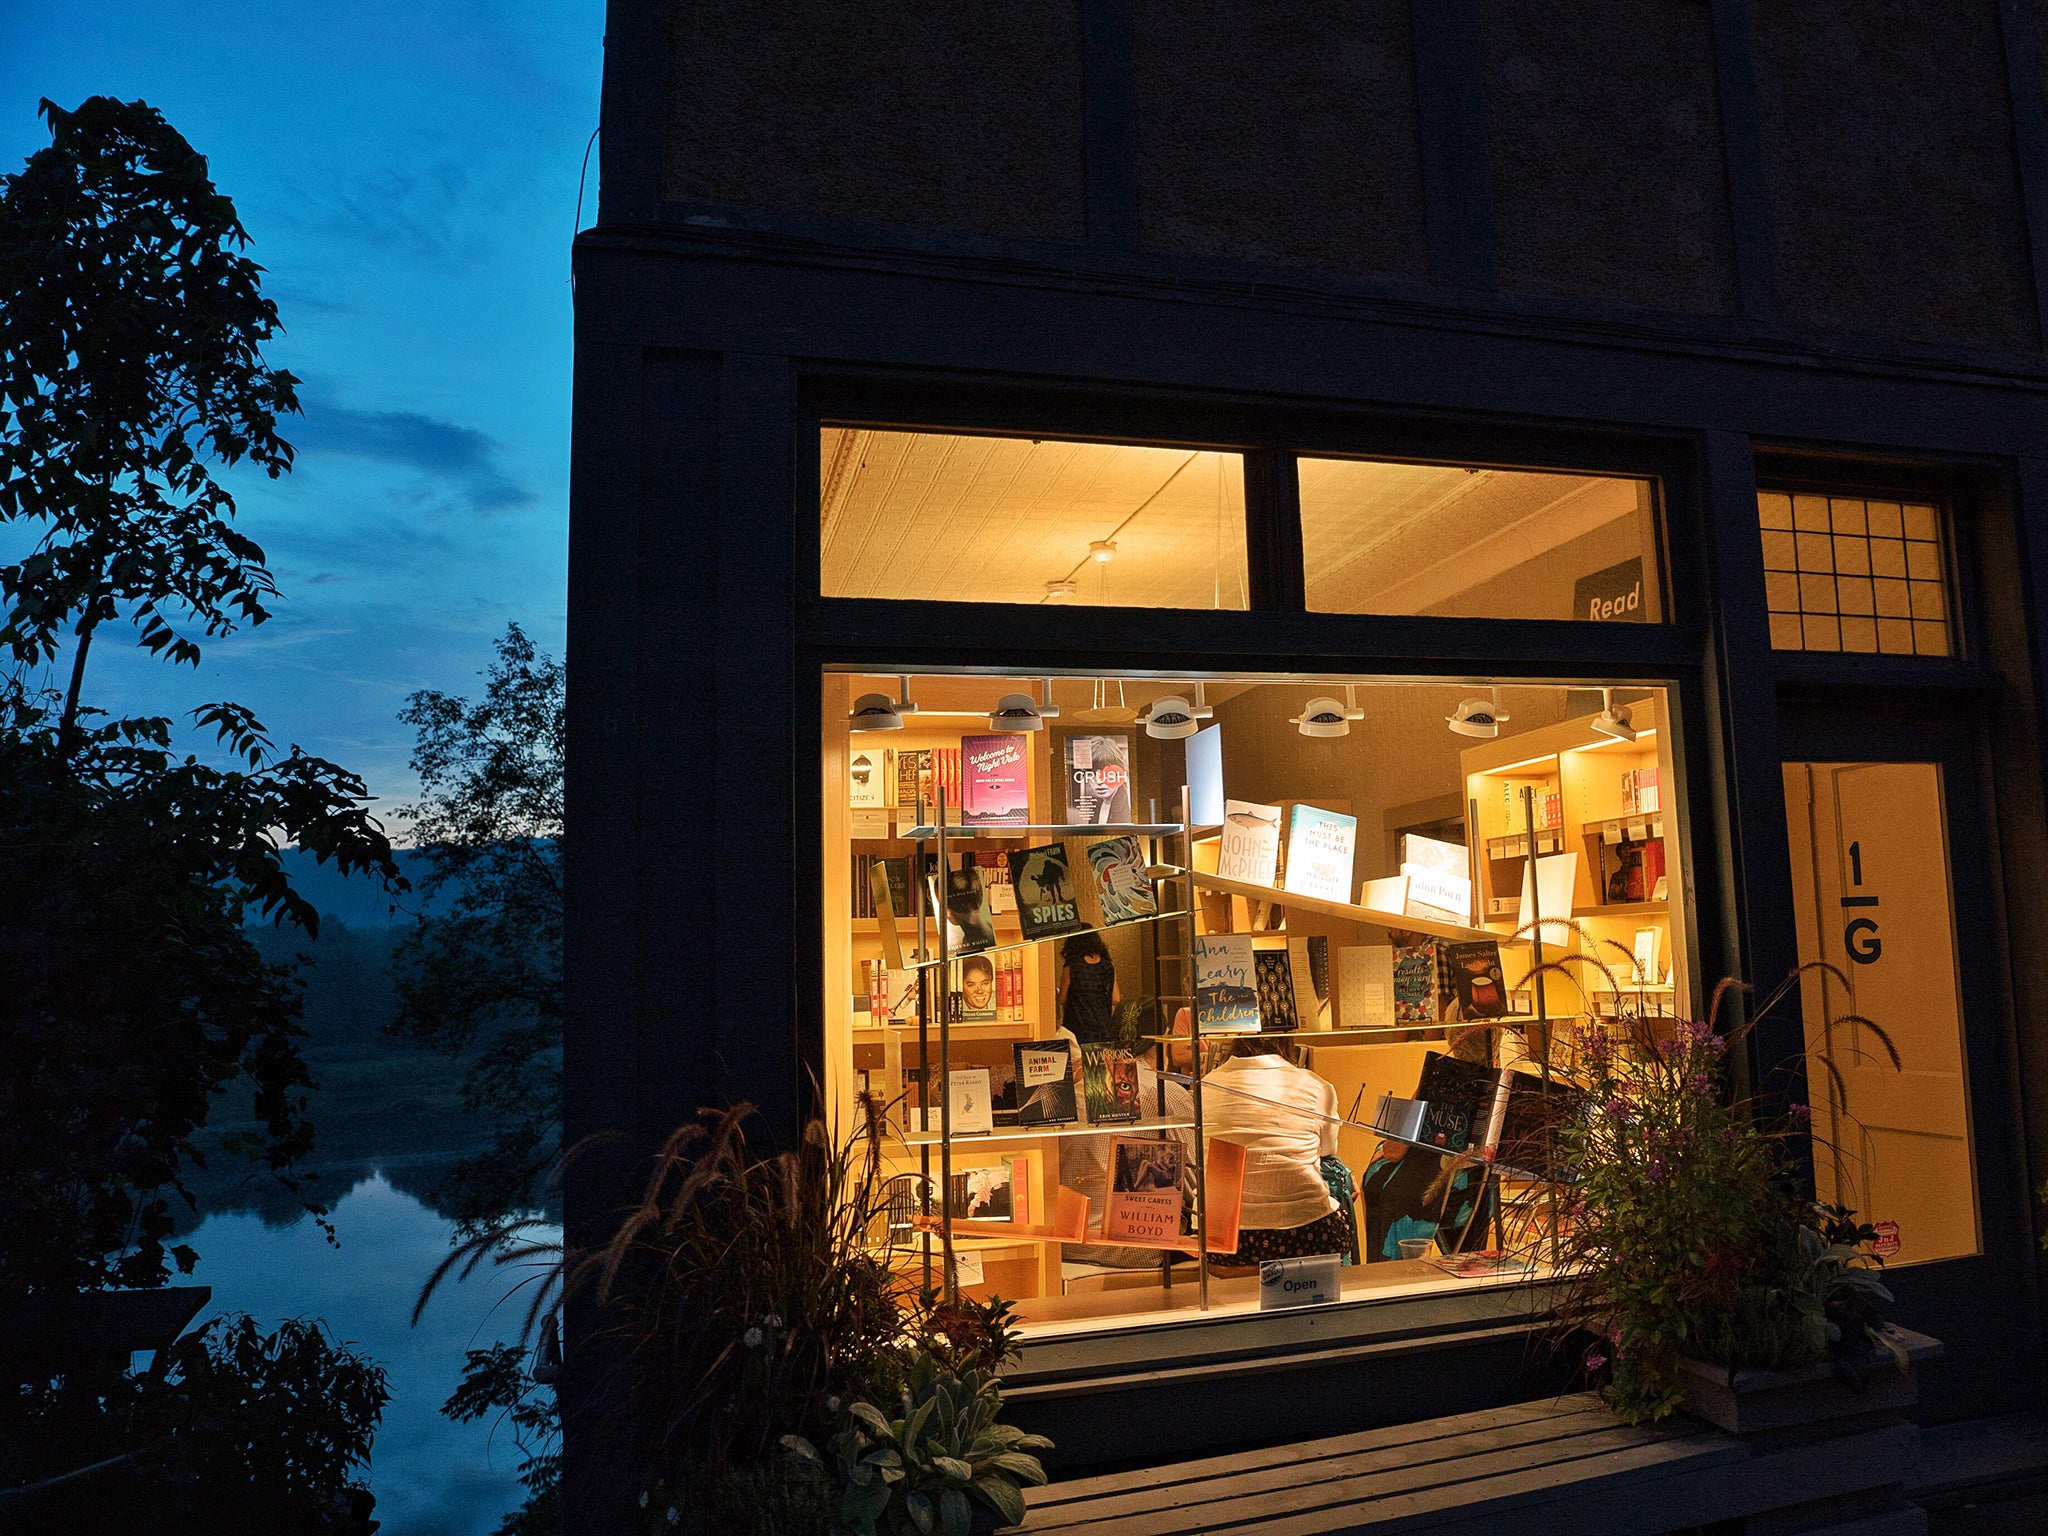 Desert Island Books: This shop puts a spin on the classic format